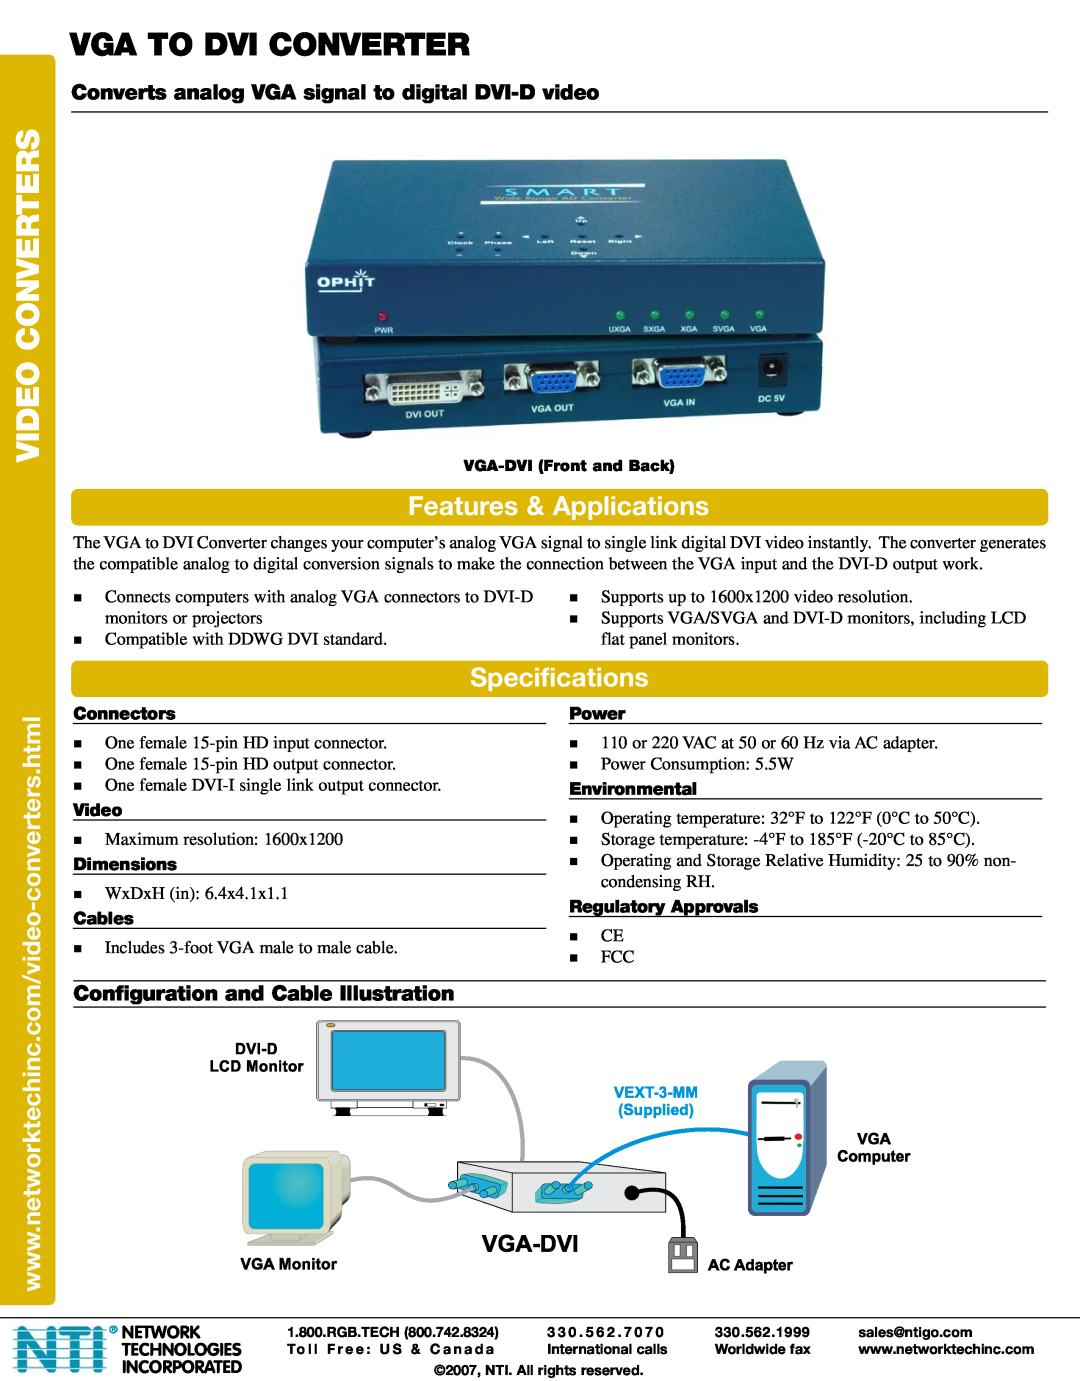 Network Technologies VGA-DVI specifications video converters, vGA to dvi converter, Features & Applications, connectors 